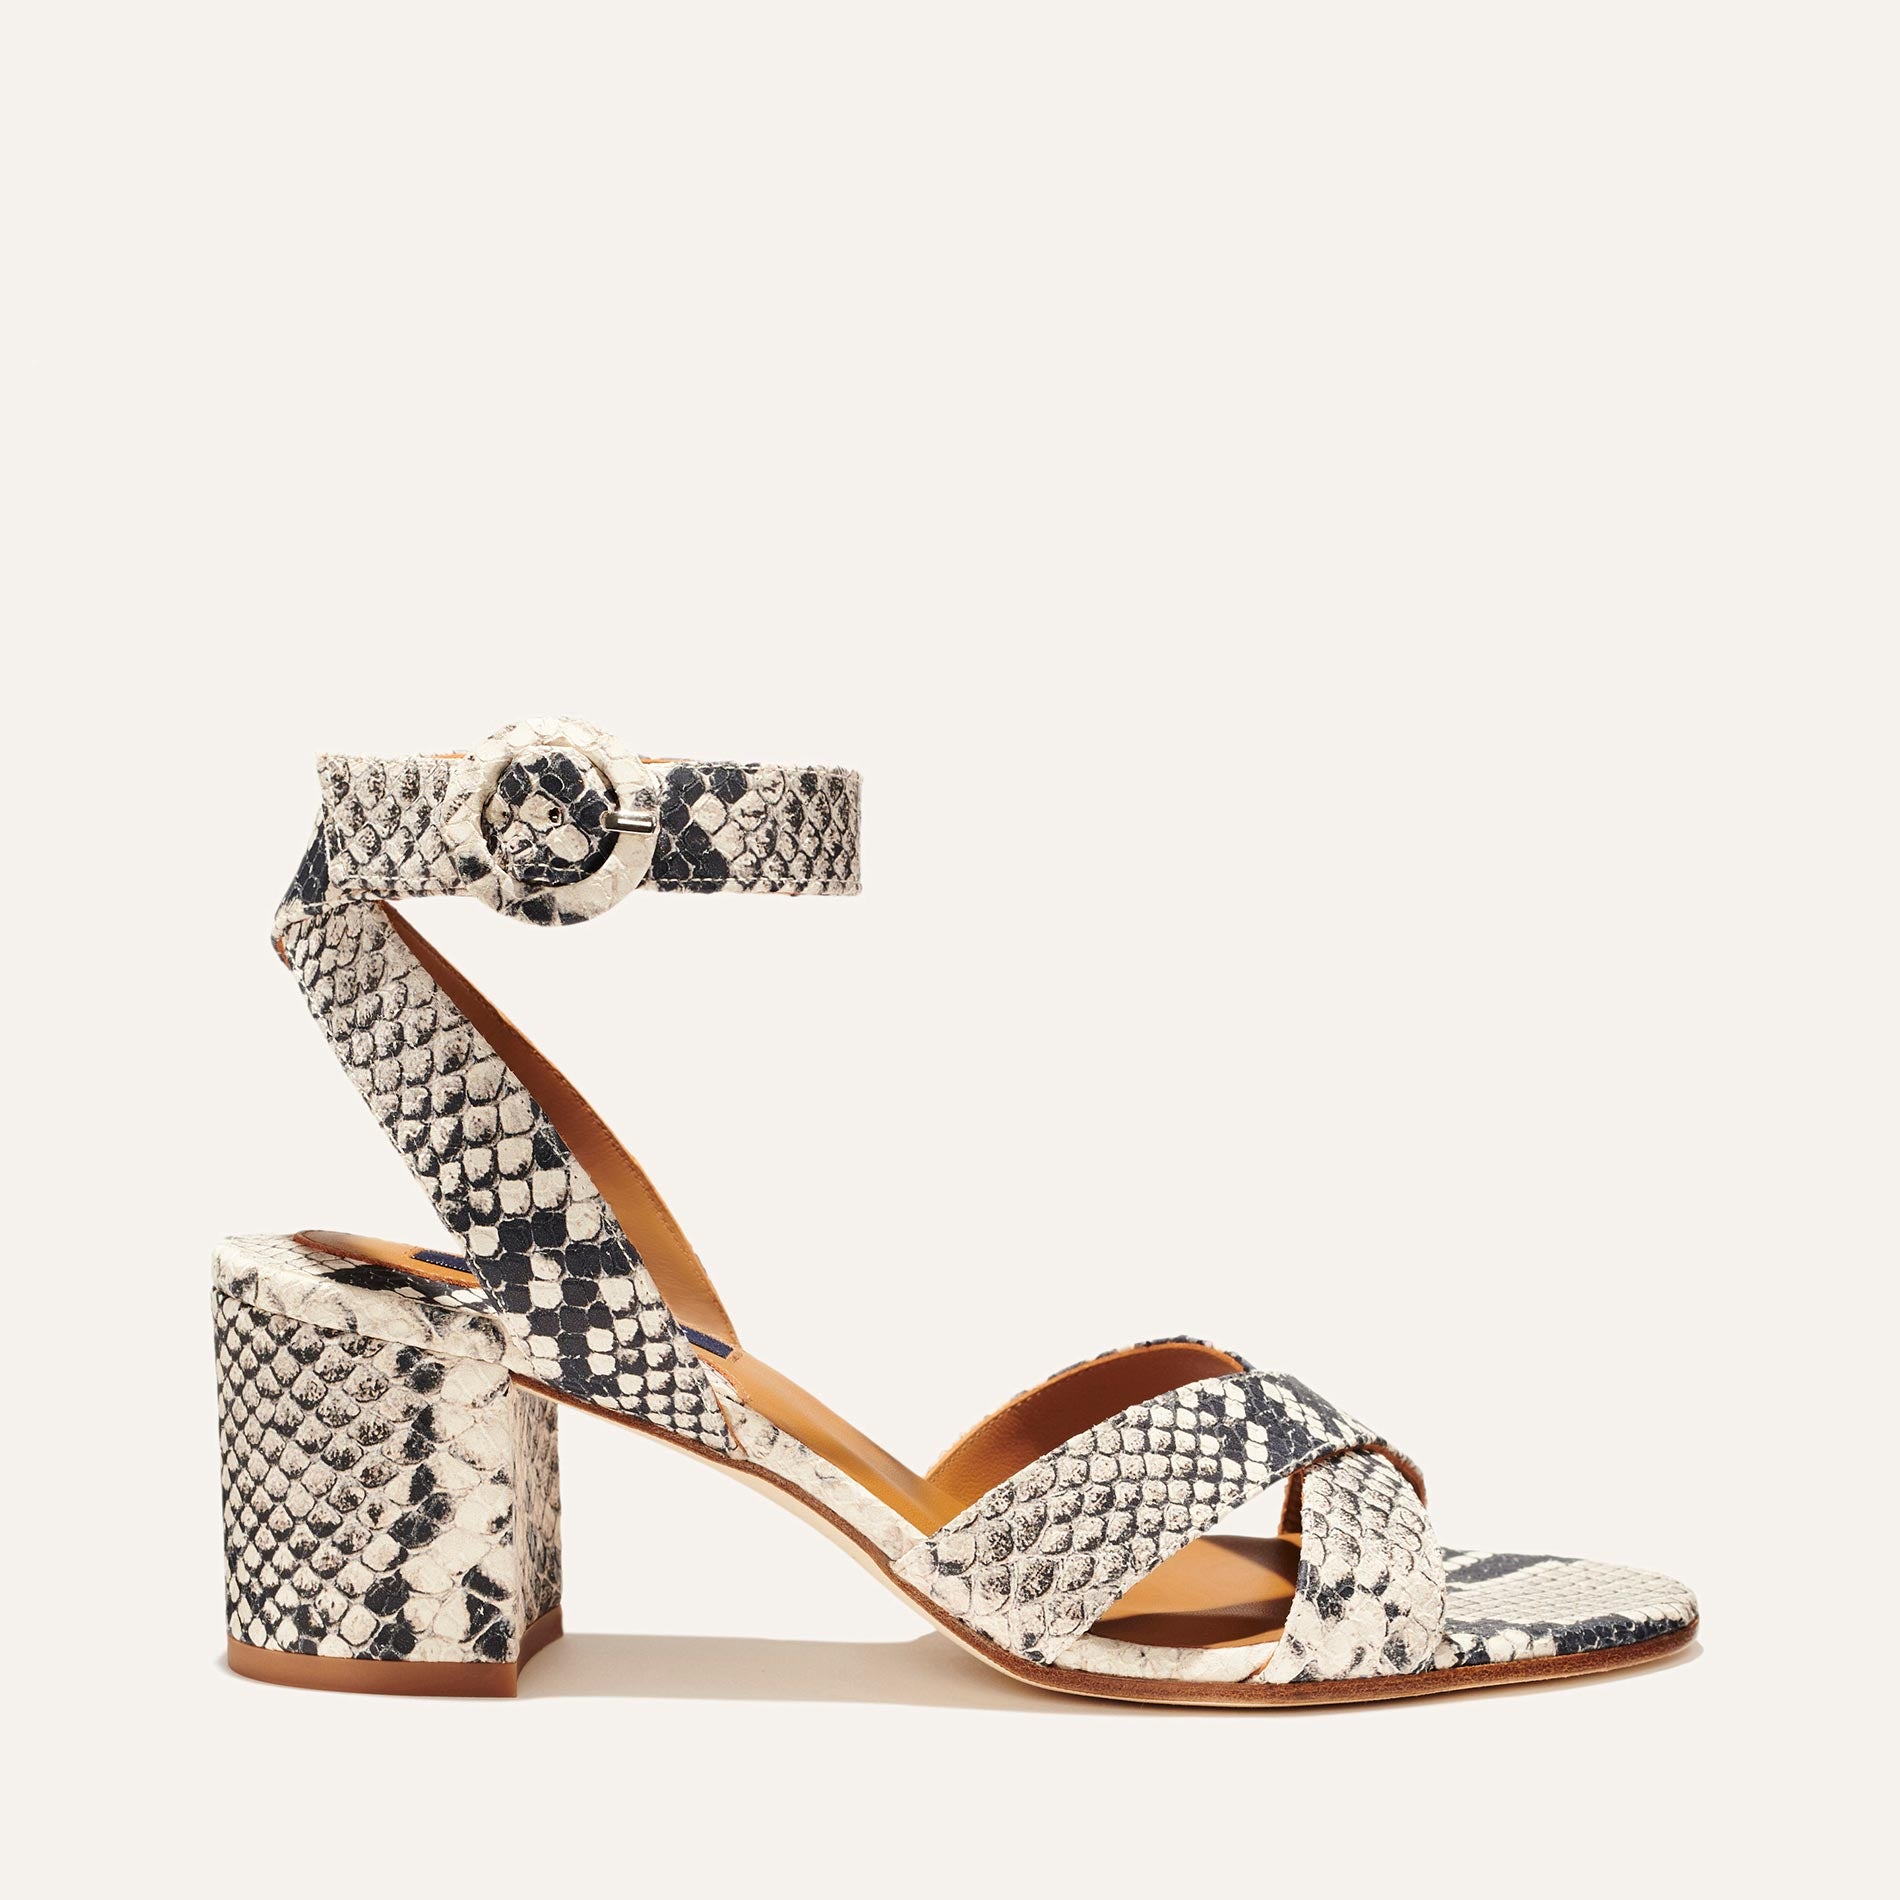 Margaux's classic and comfortable City Sandal, made in a python-embossed leather with comfortable straps and a walkable block heel